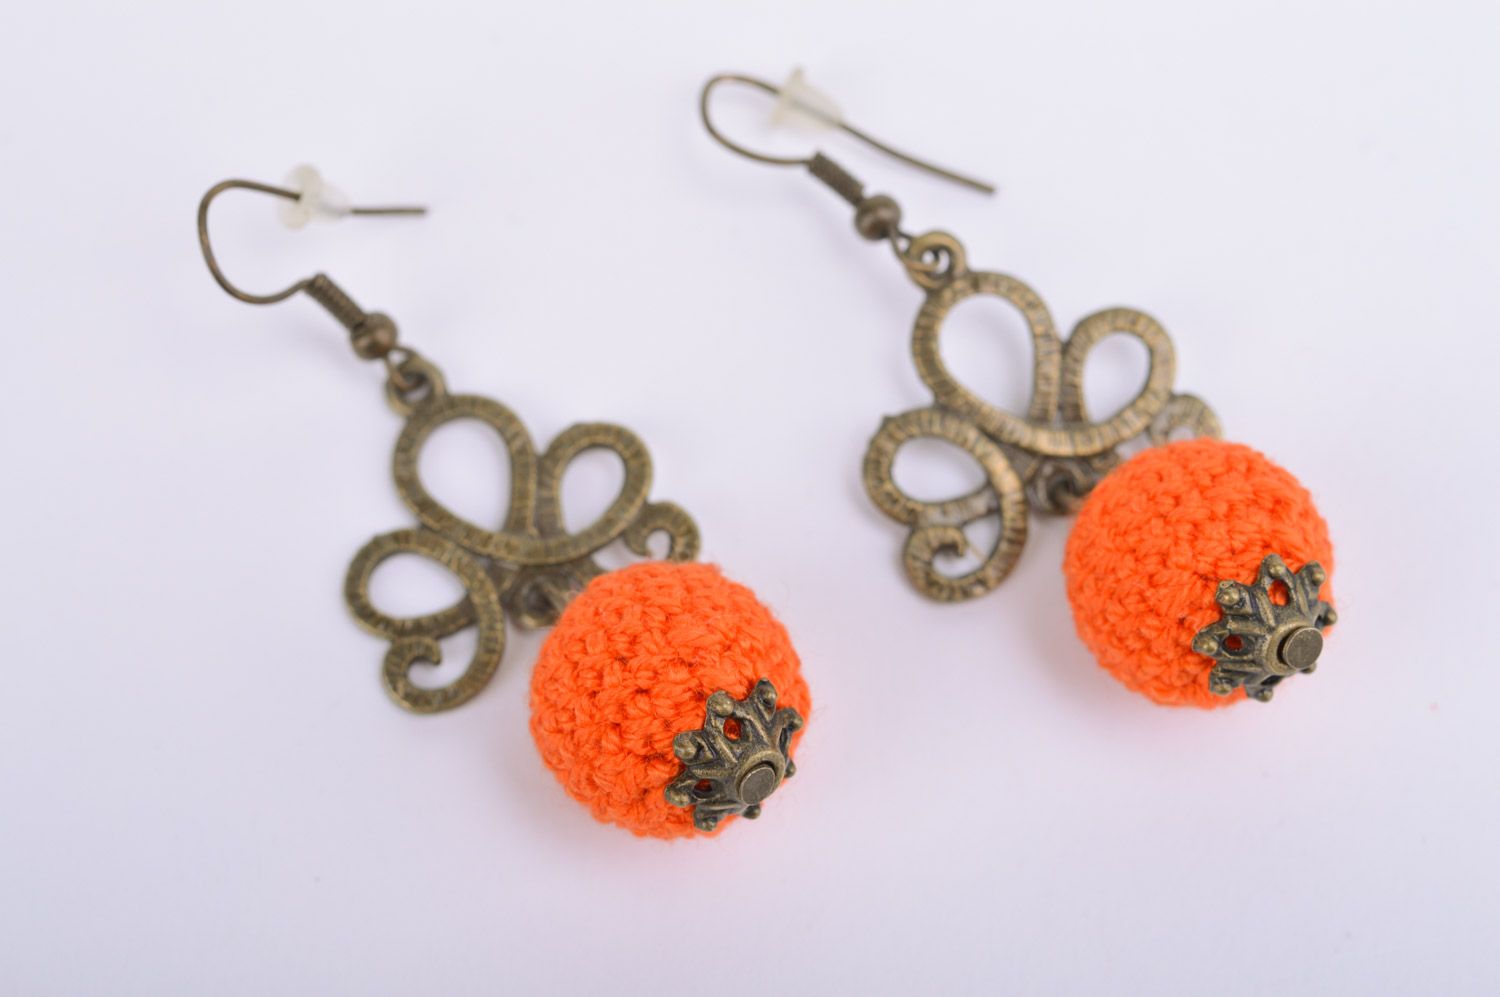 Handmade long earrings with crochet over beads and vintage fittings photo 2